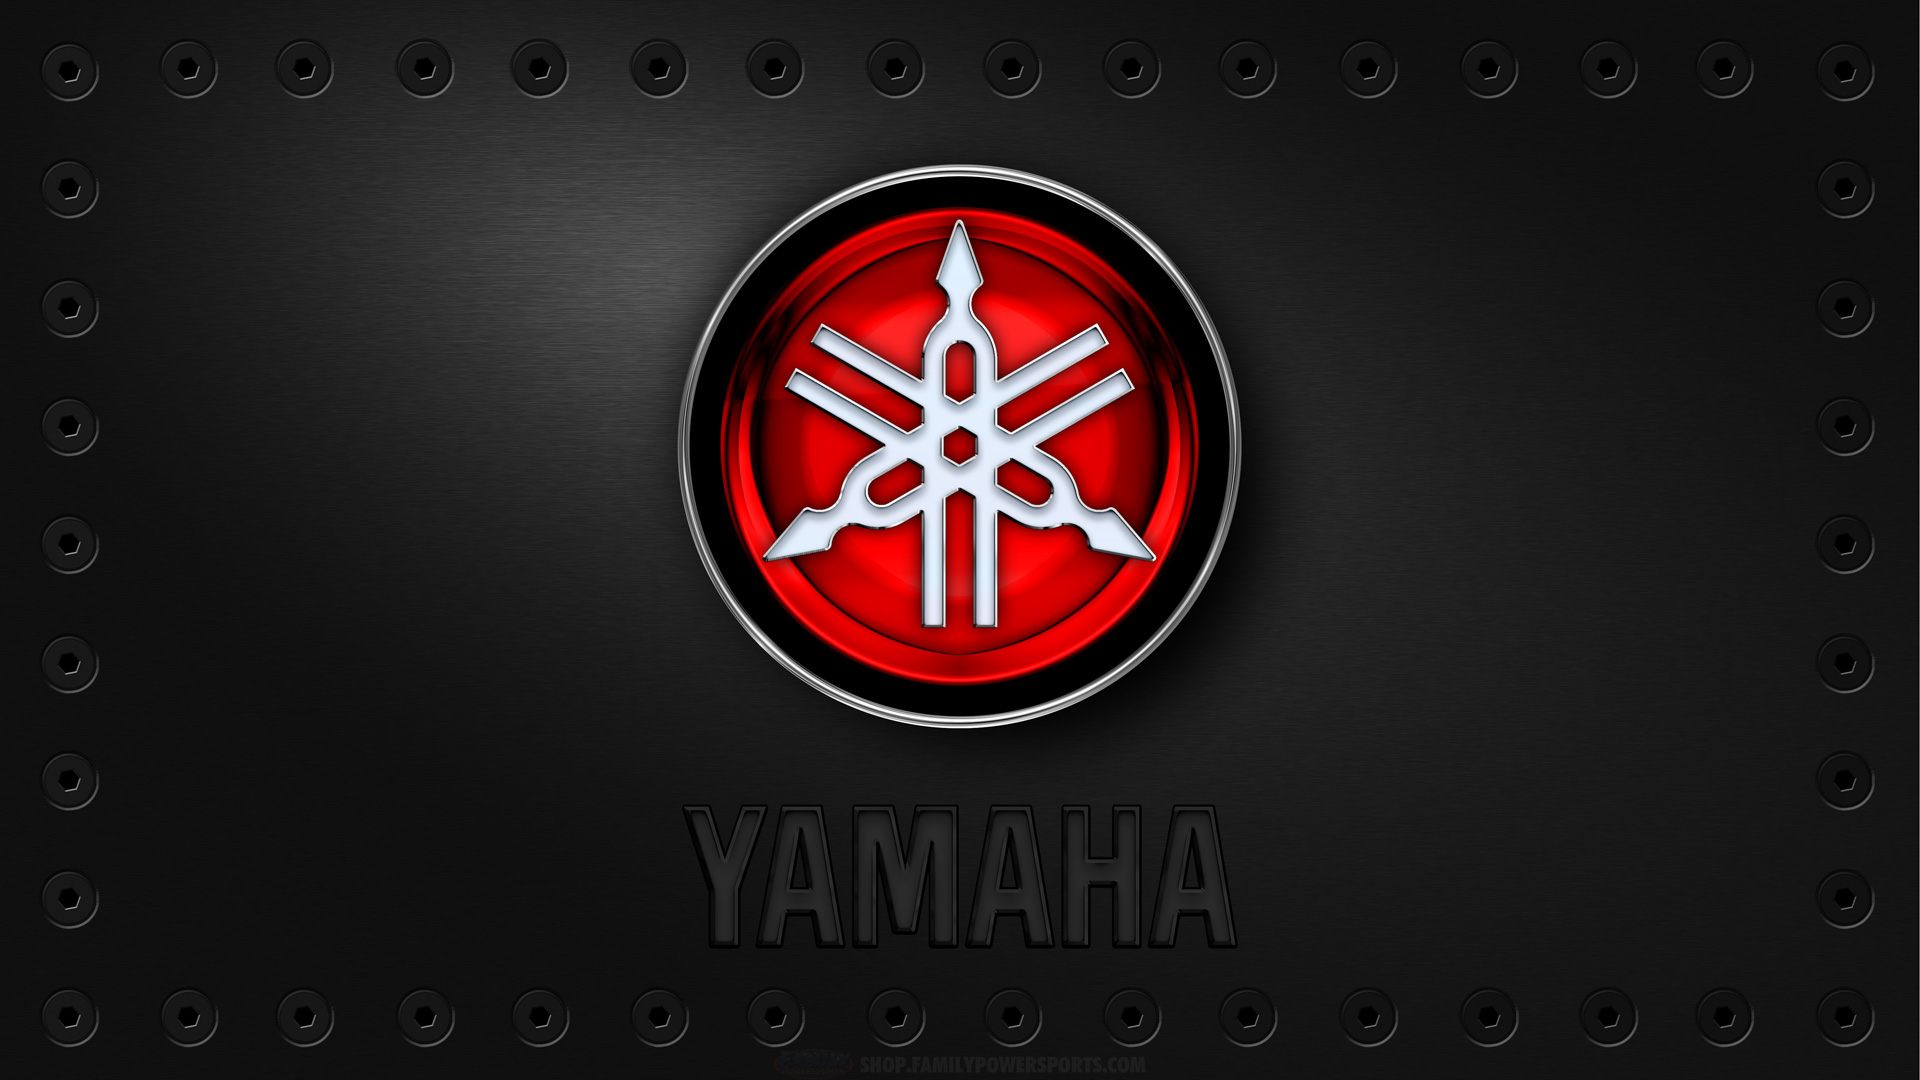 HD Yamaha Wallpaper Background Images For Download 1920x1080